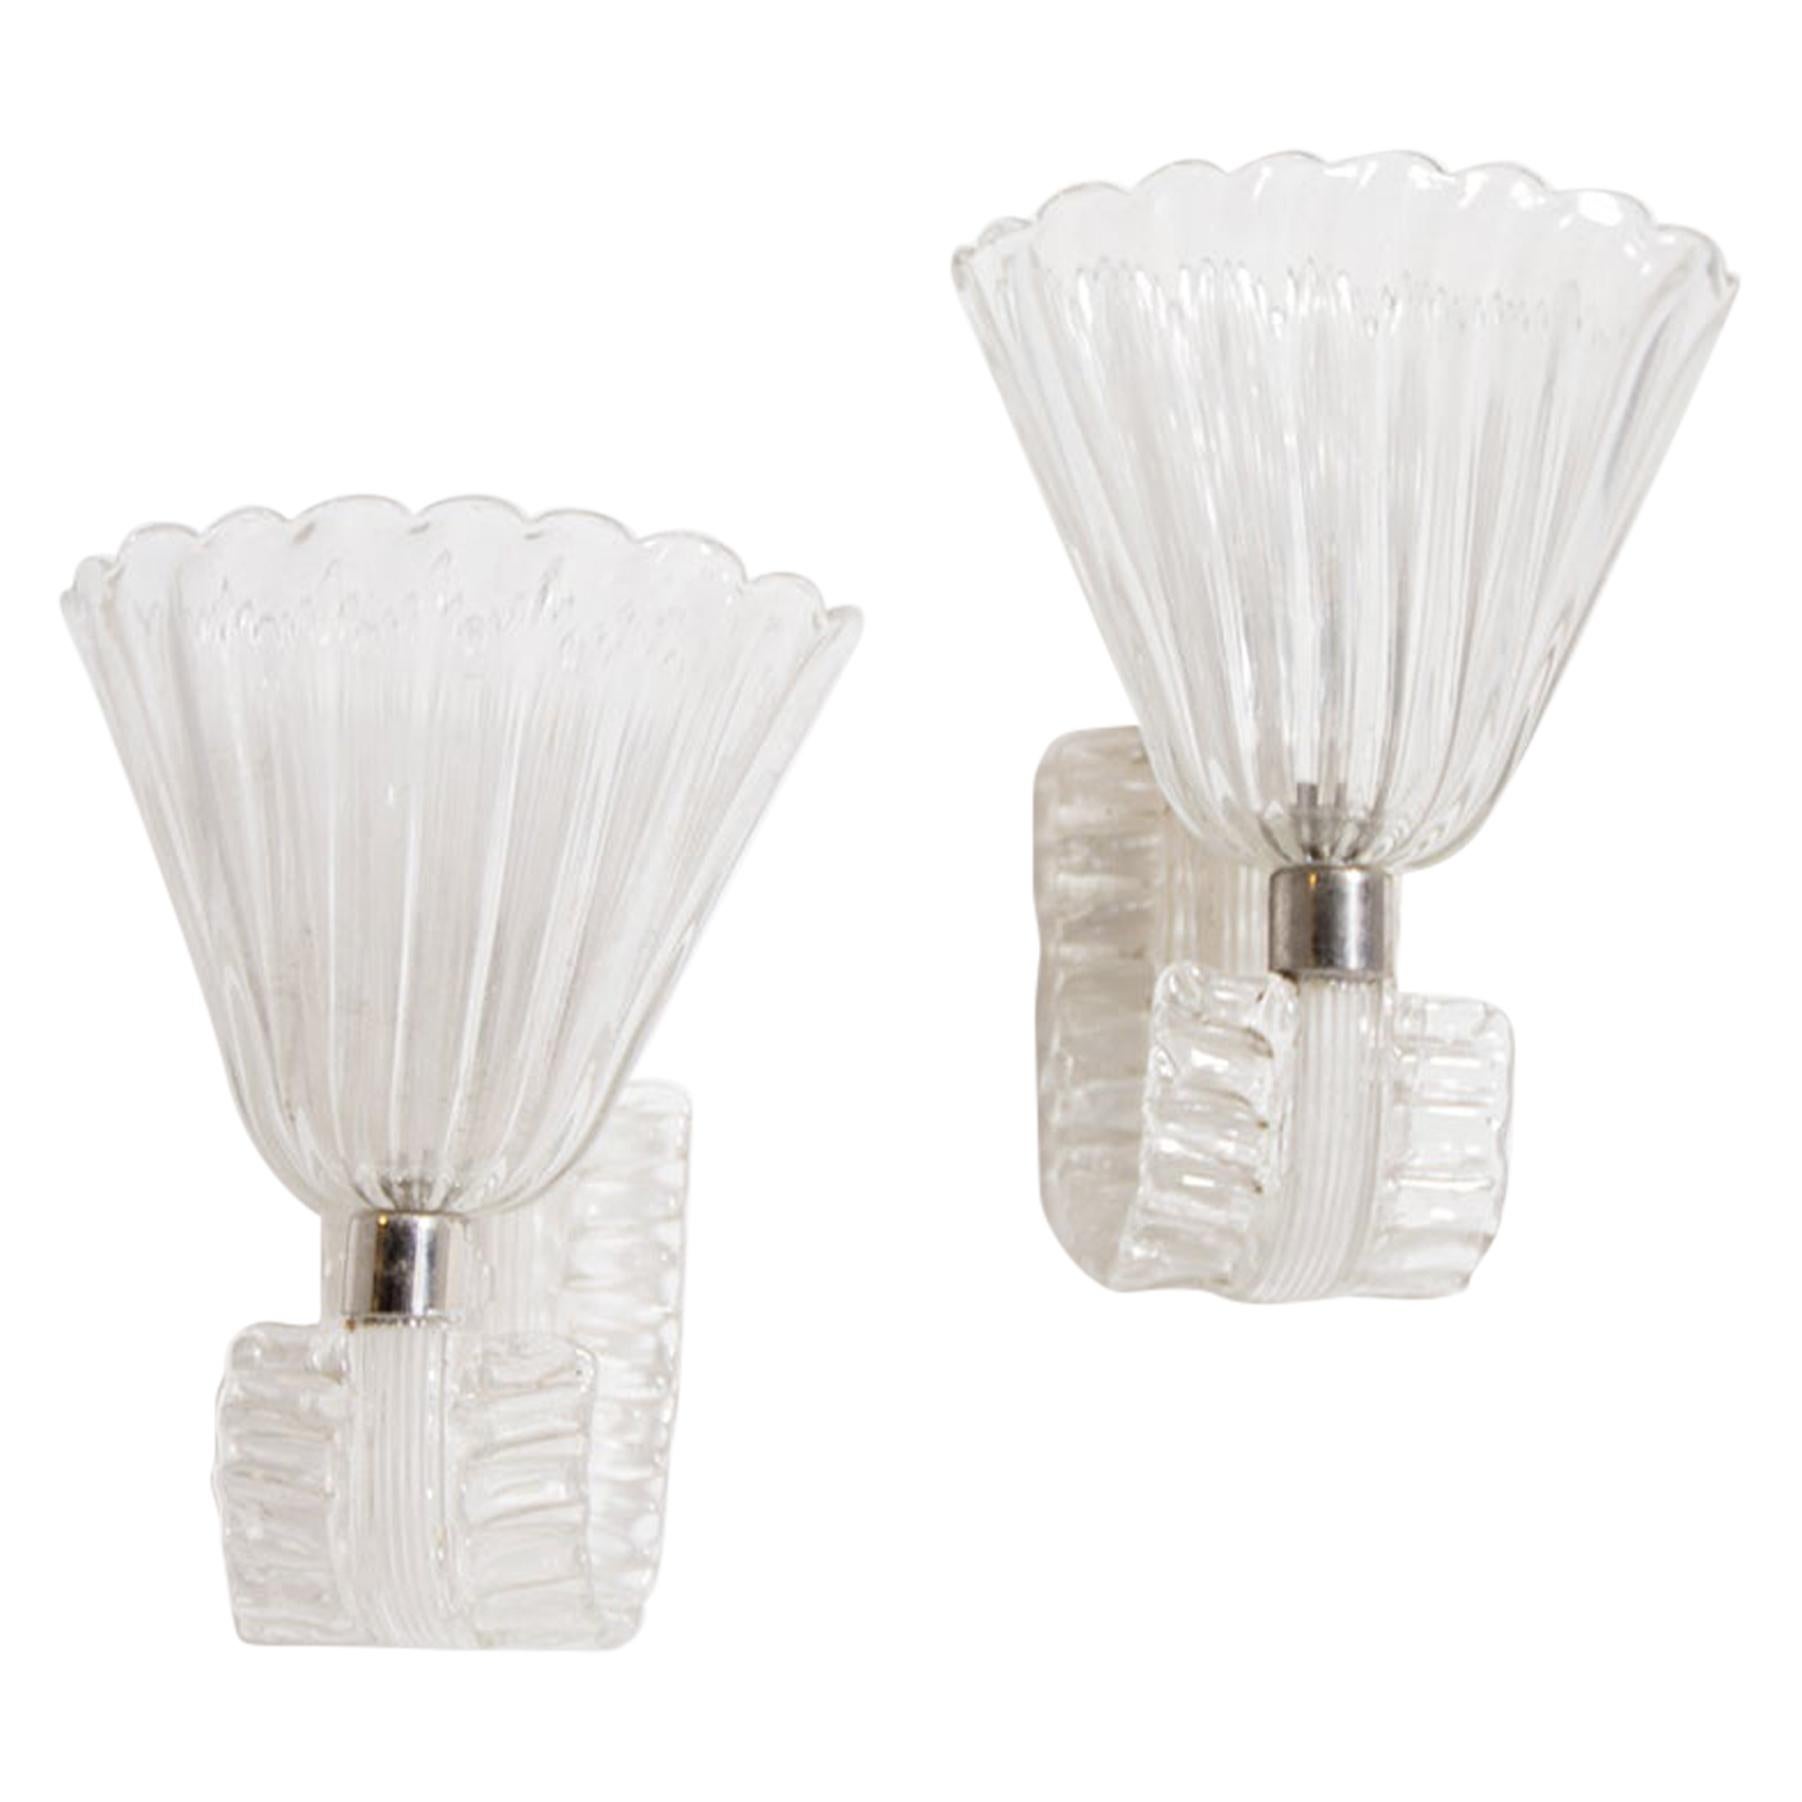 Pair of Wall Lamps by Barovier & Toso in Murano Glass, 1950s